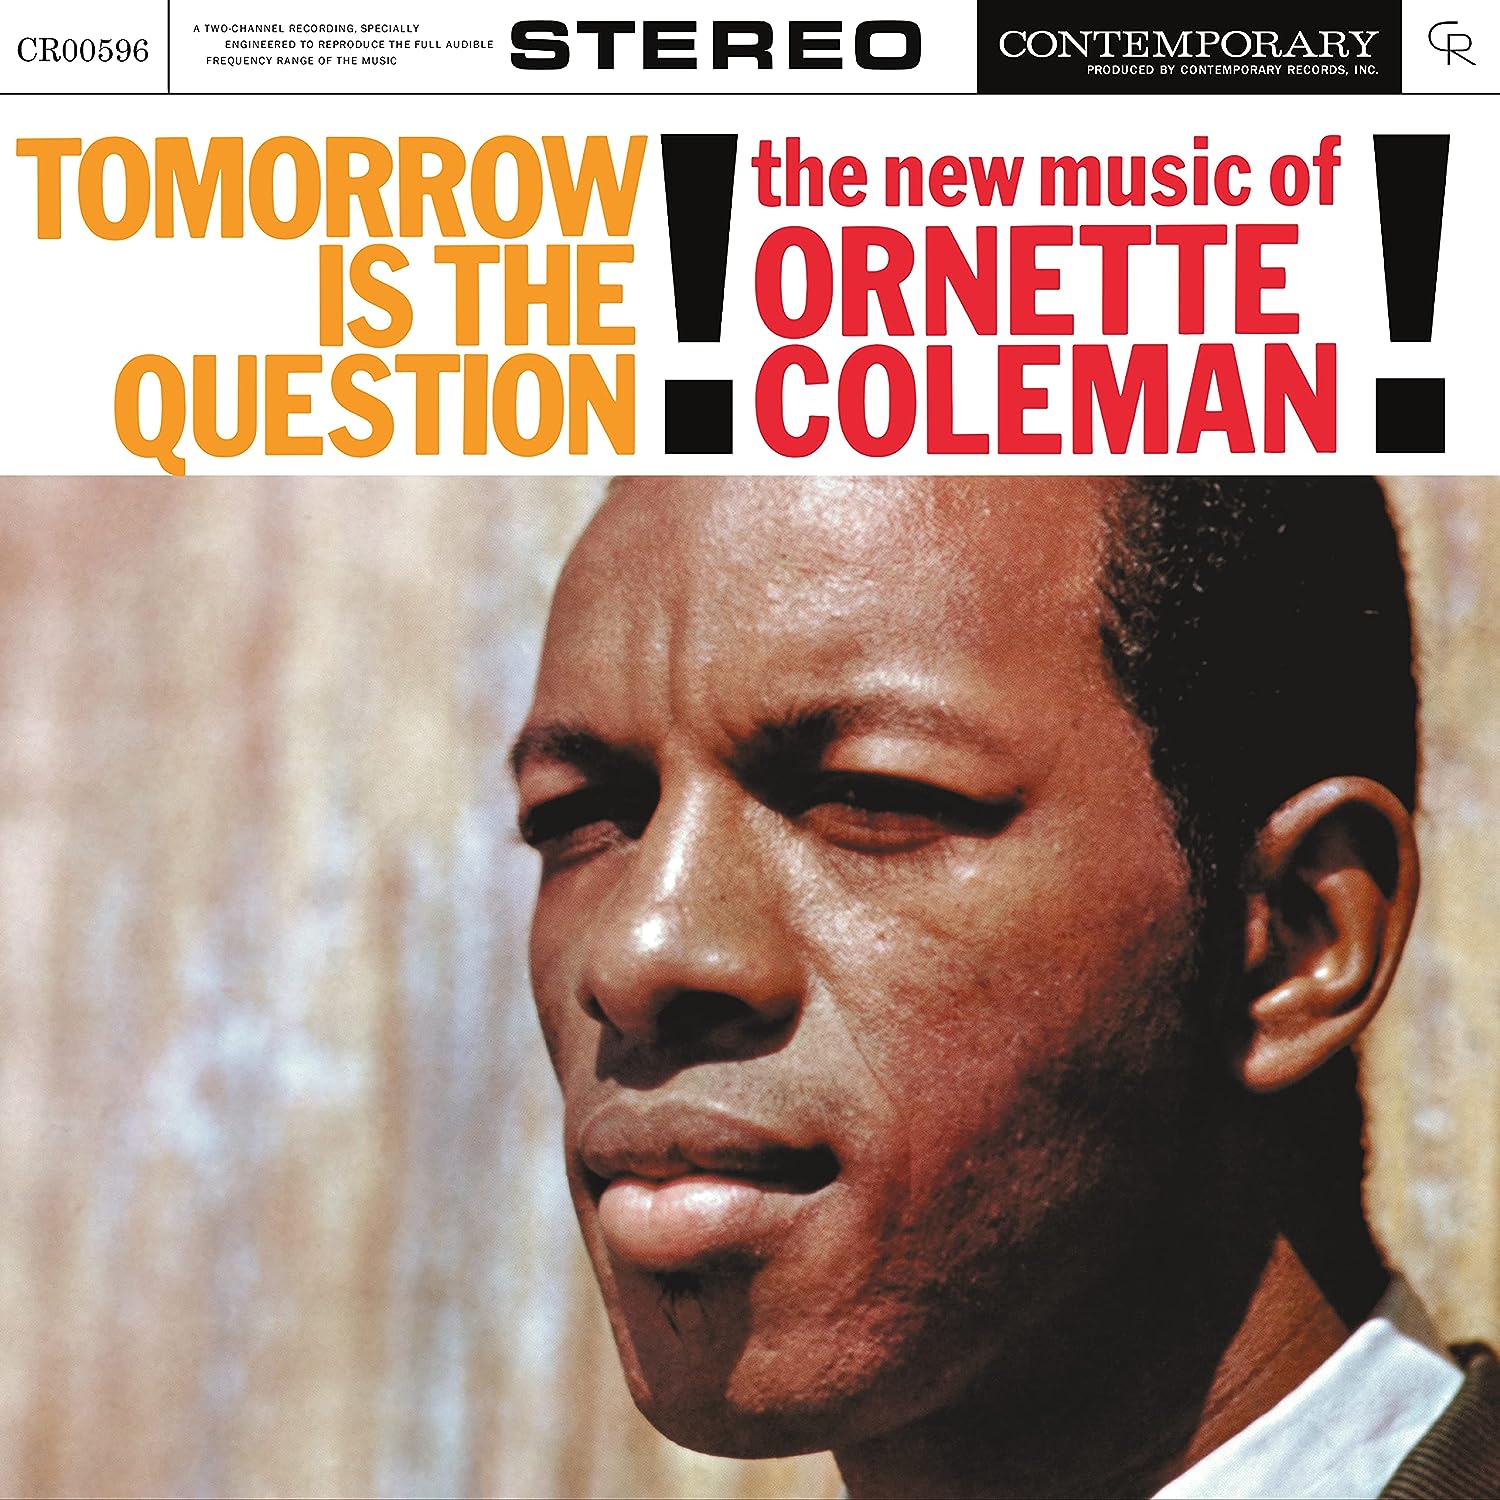 Джаз Universal (Aus) Ornette Coleman - Tomorrow Is The Question (Acoustic Sounds) (Black Vinyl LP) mccoy tyner today and tomorrow 1 cd